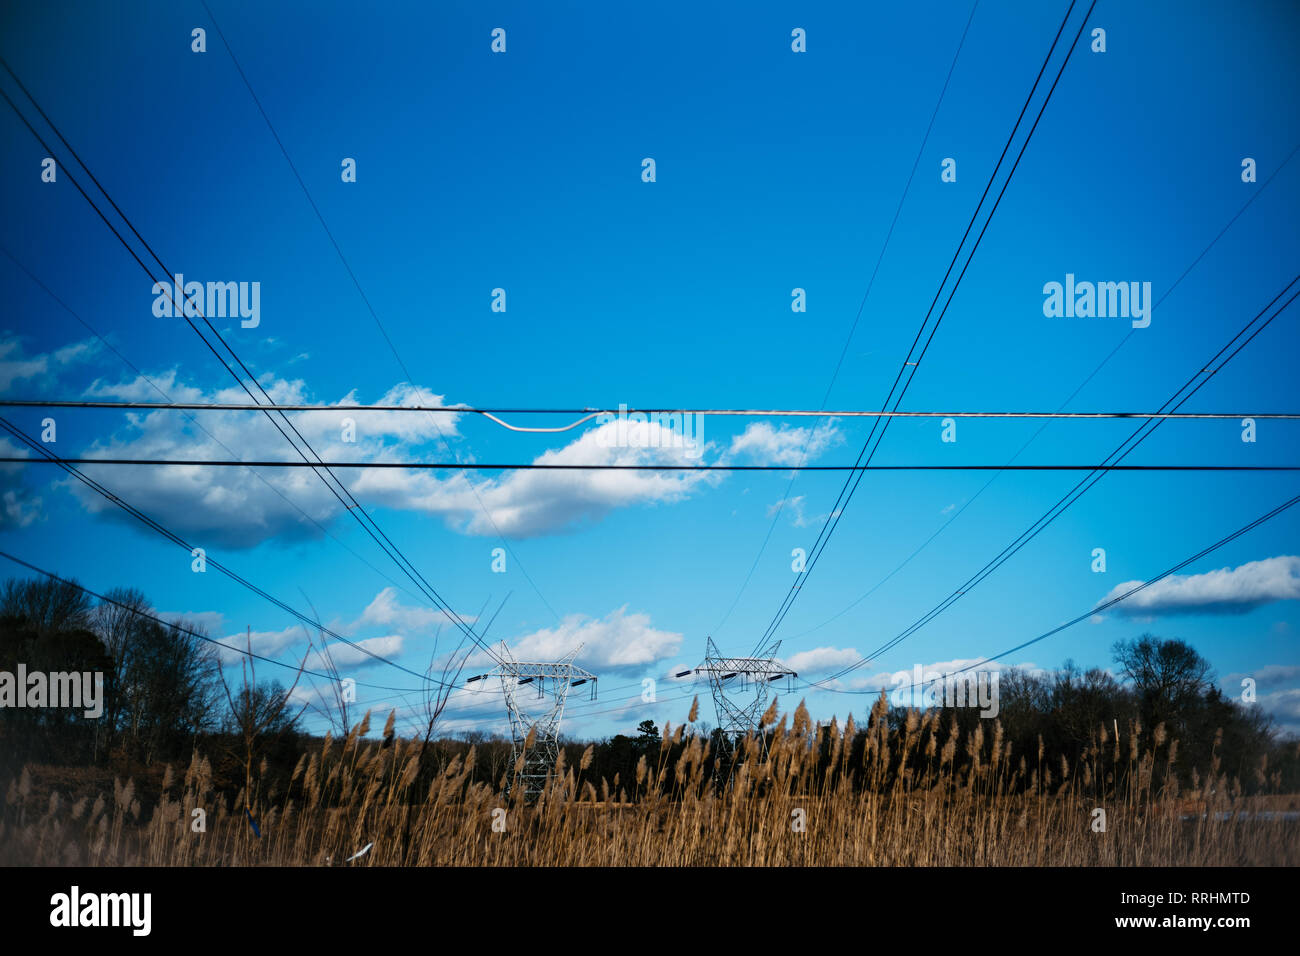 Electricity pylon and lines in countryside blue sky Stock Photo